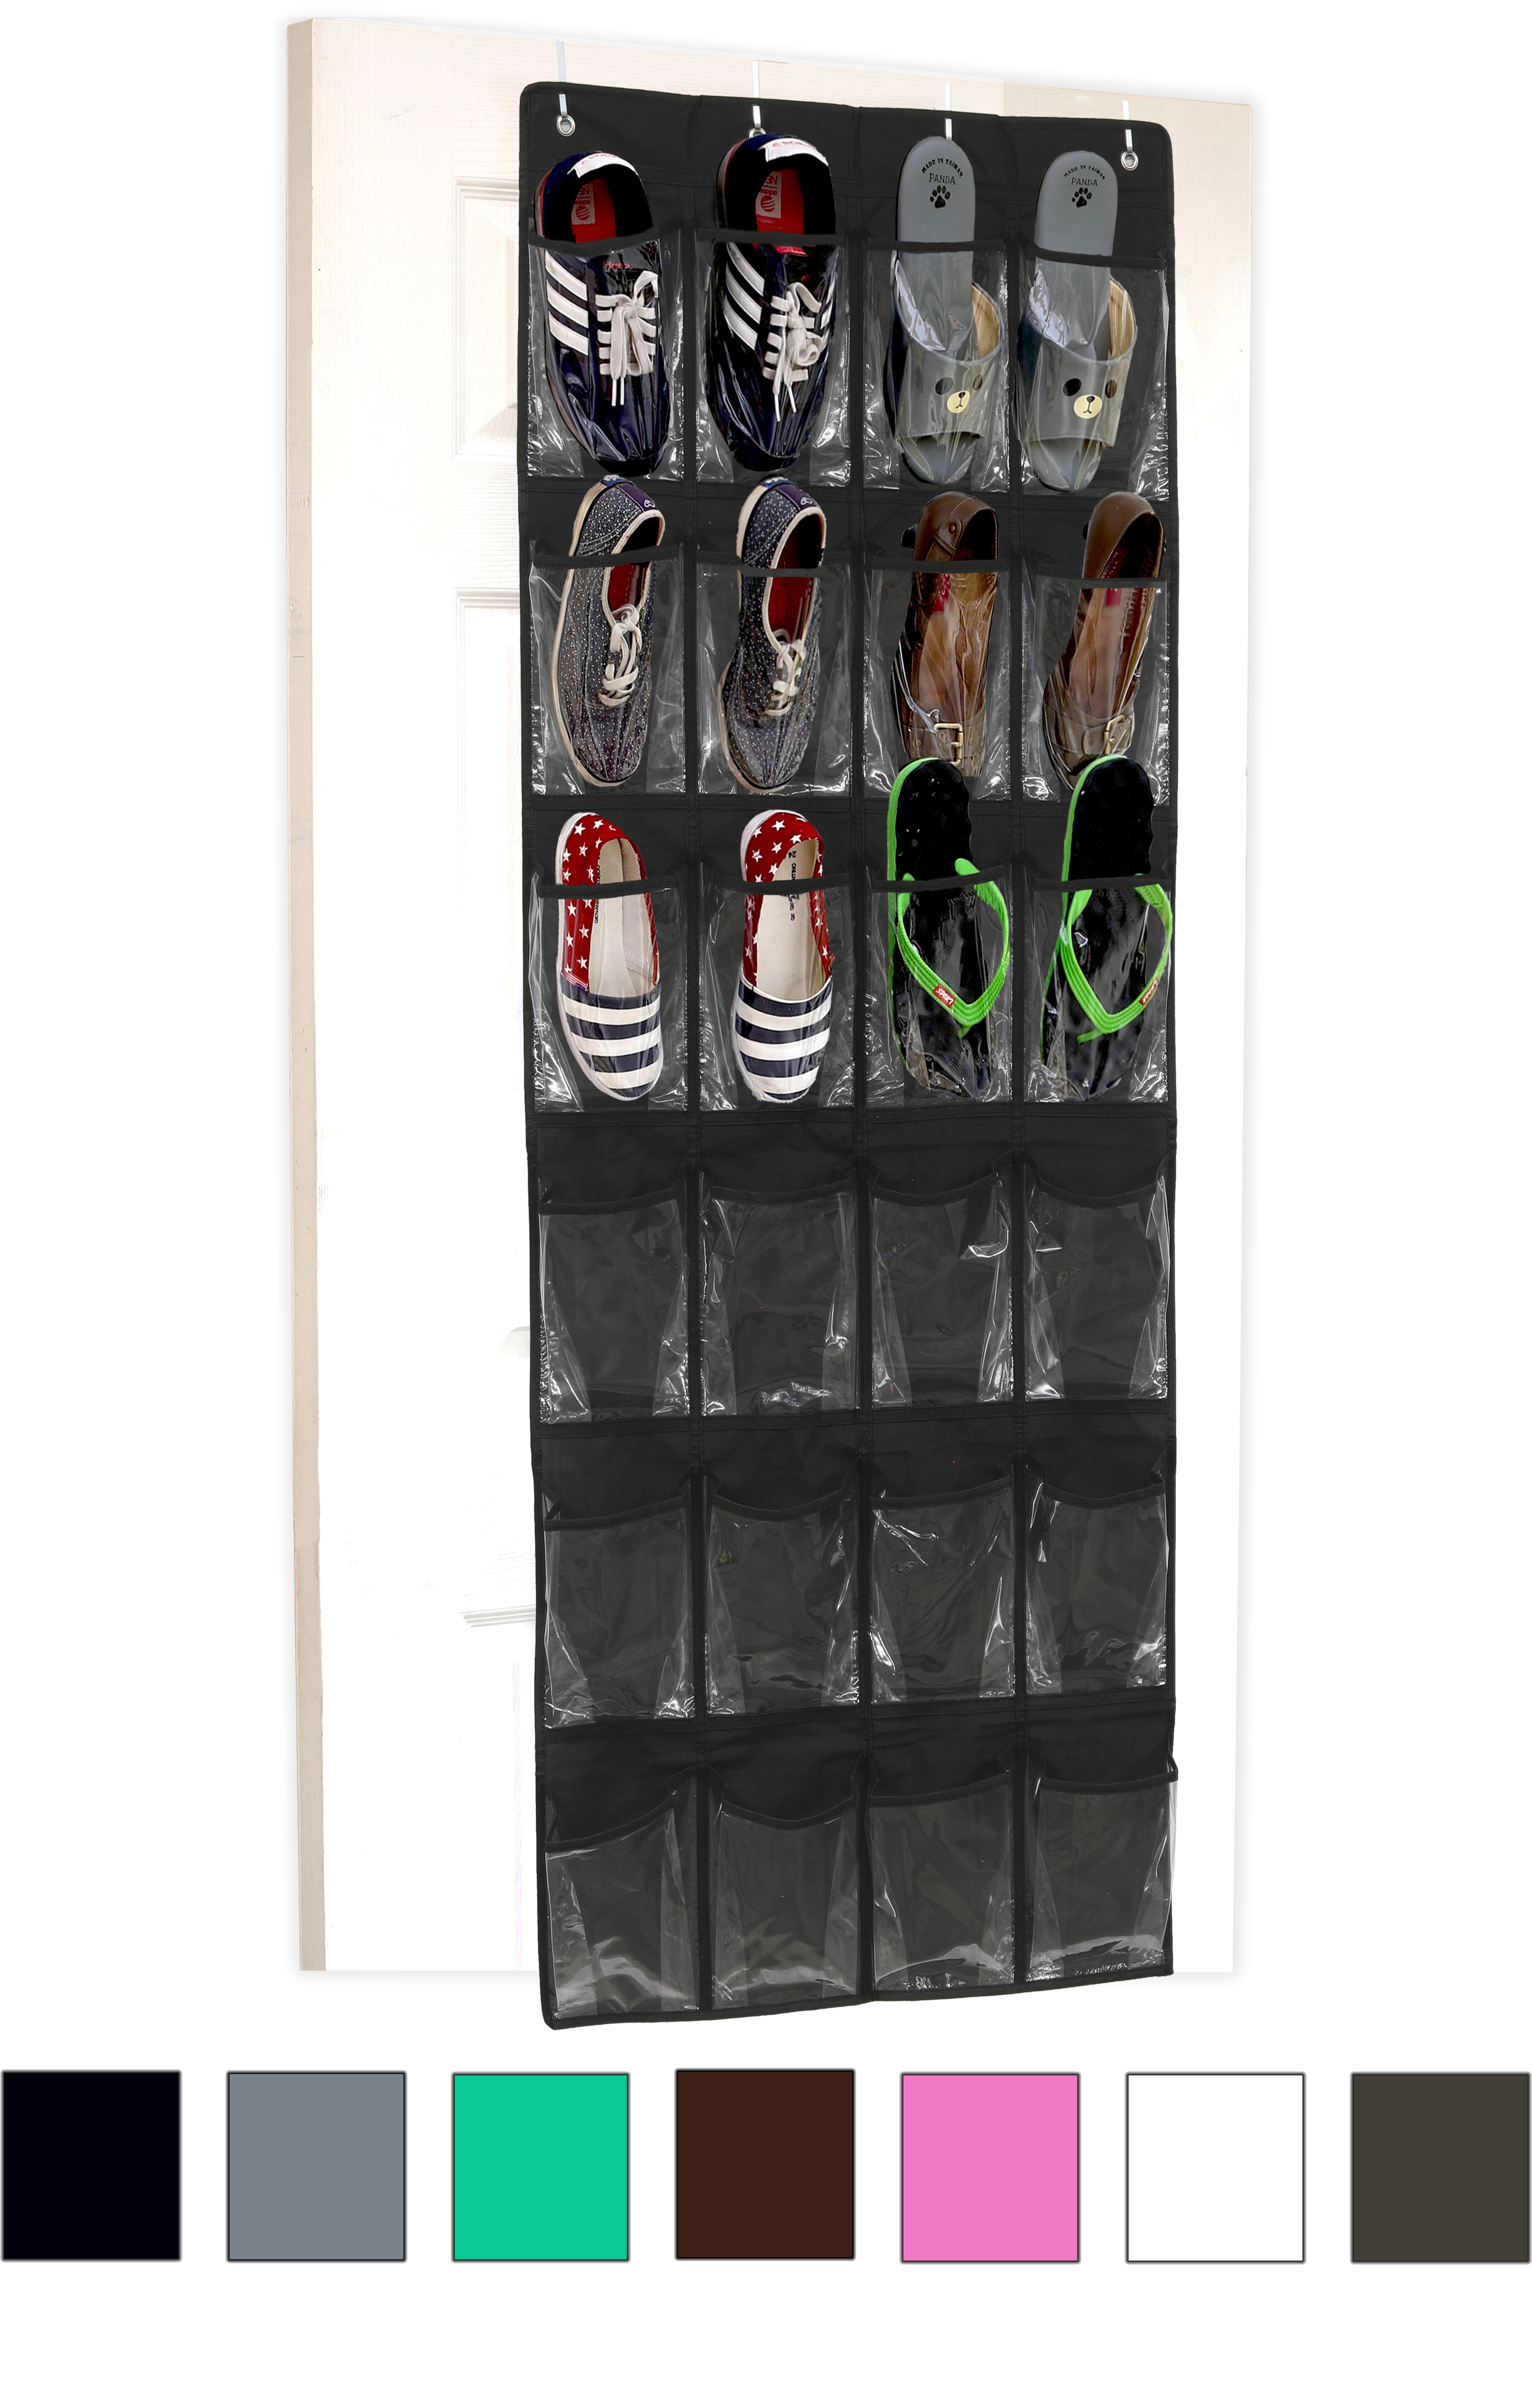 24 Pockets - Simplehouseware Crystal Clear Over The Door Hanging Shoe Organizer, Brown, Gray / 24 Clear Pockets